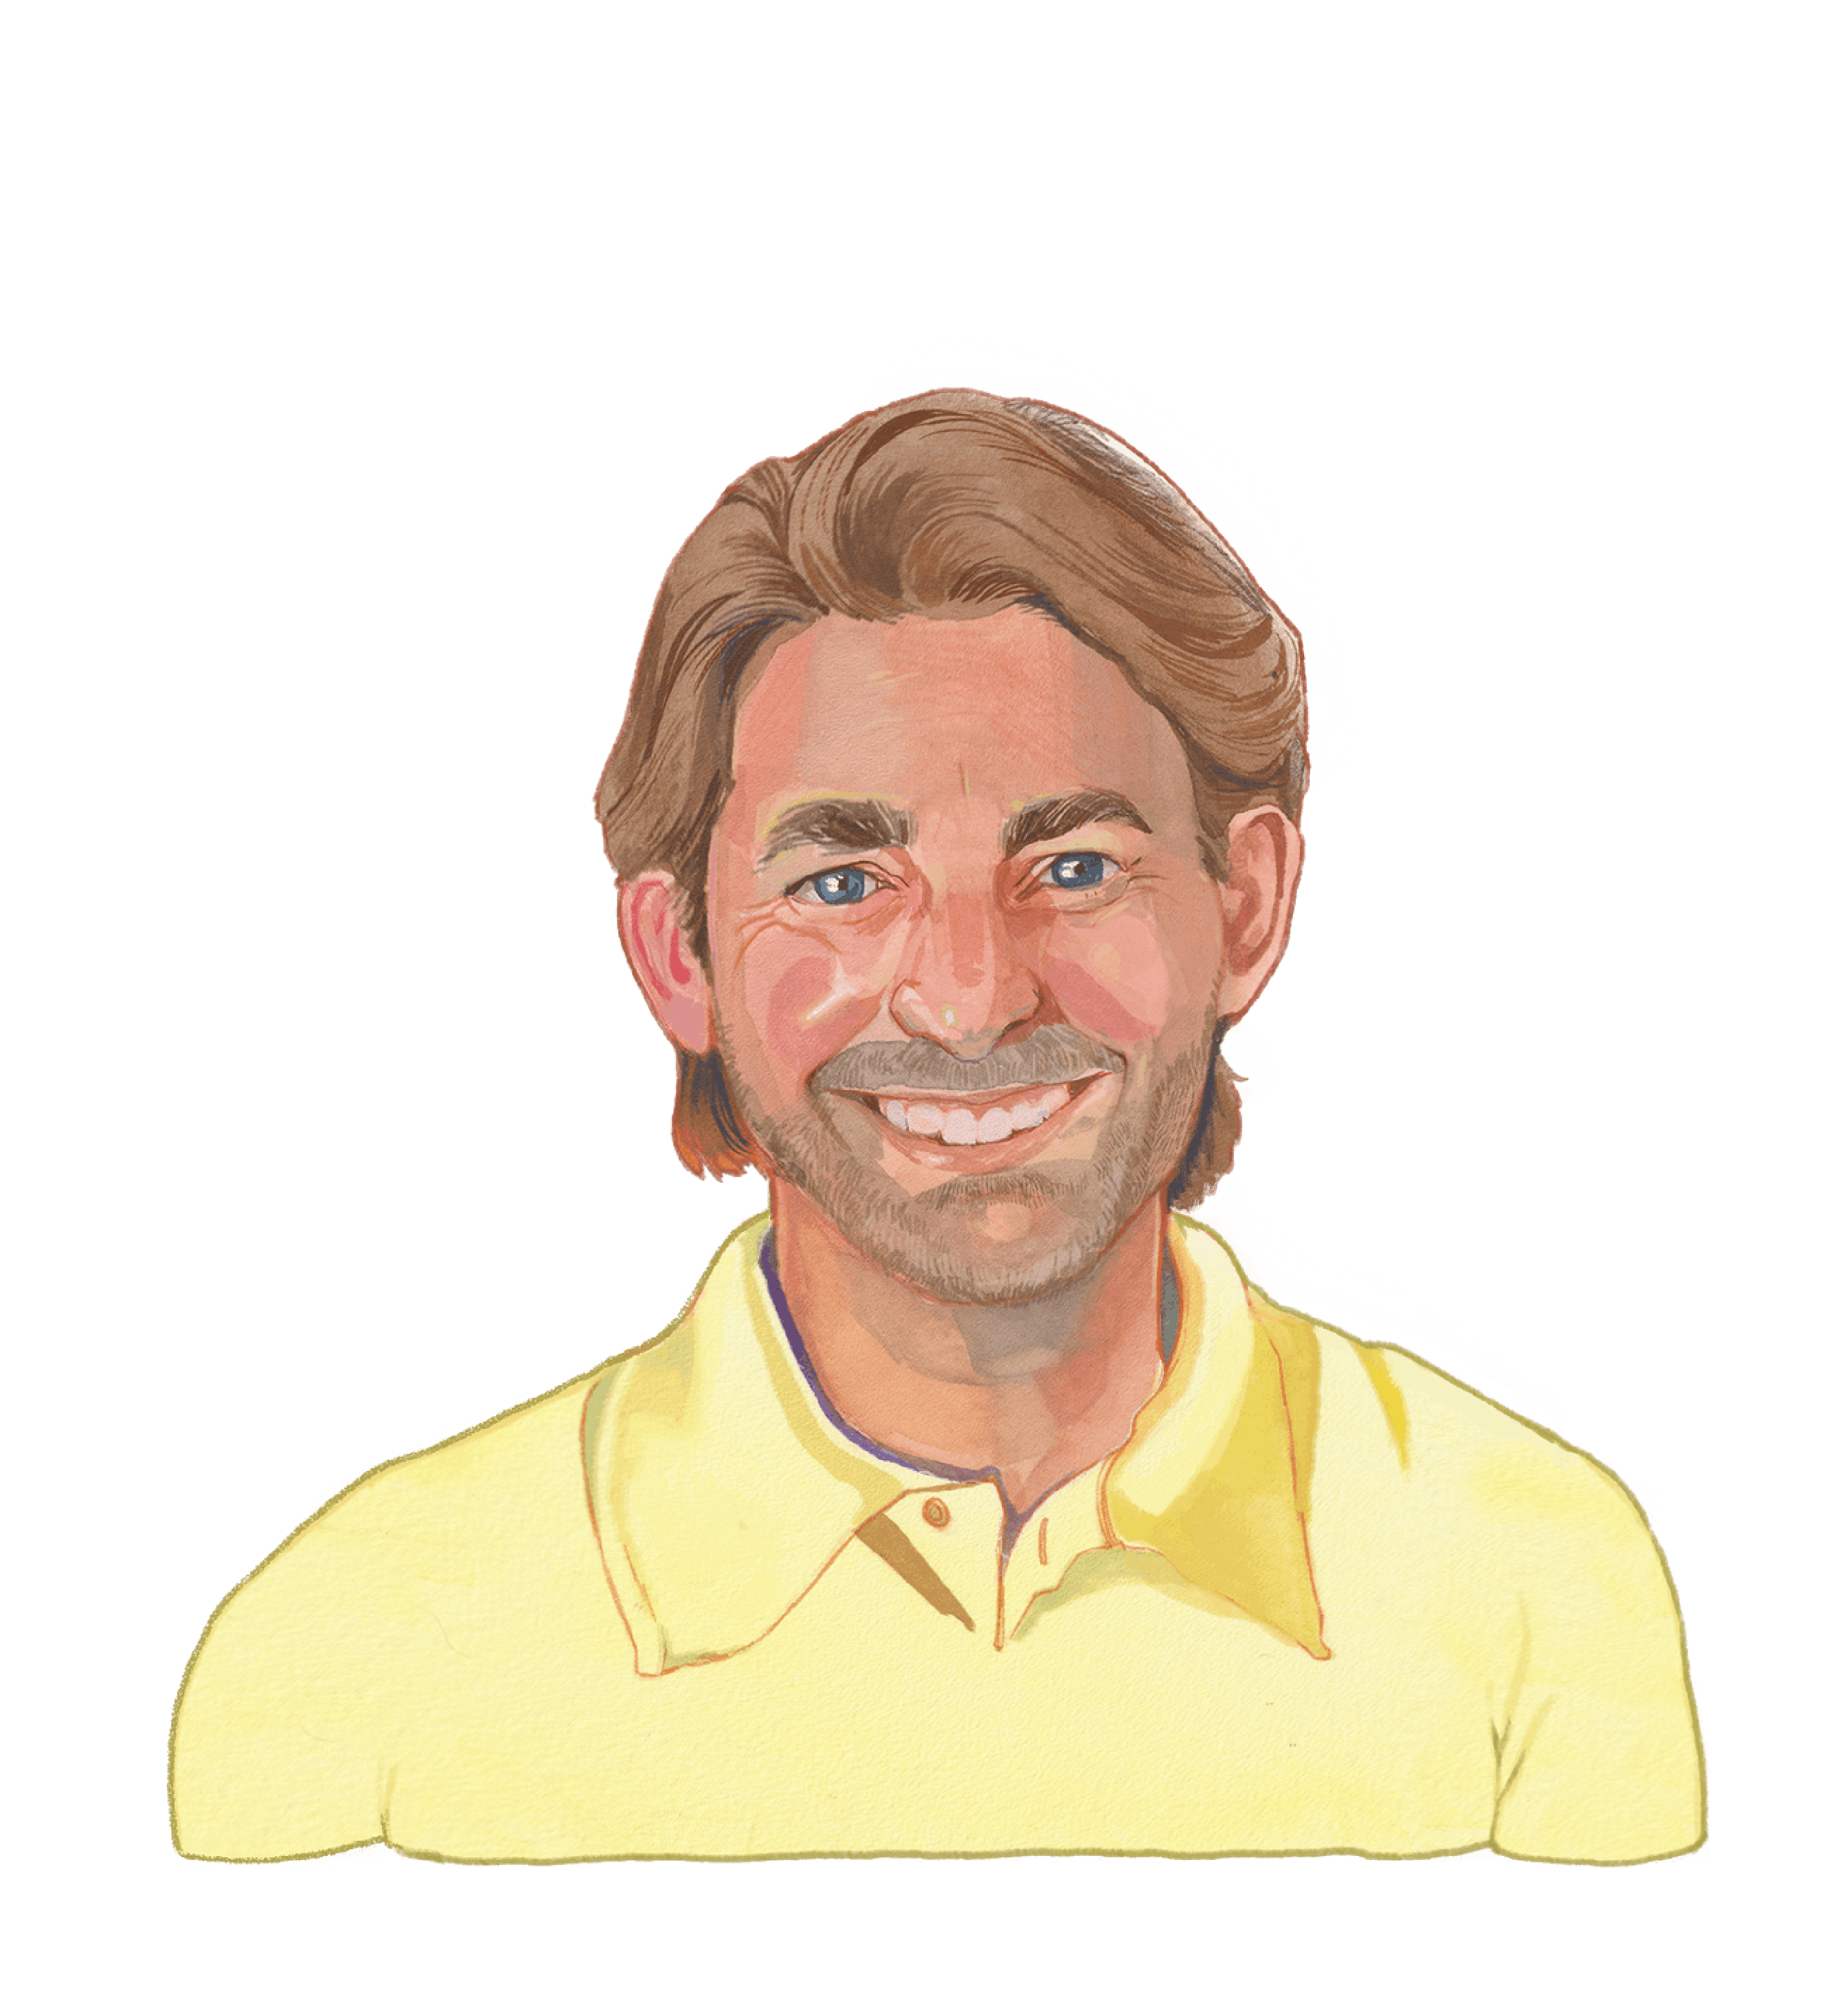 Color illustration of John K. Roman, a person with a light skin tone wearing a yellow open collar shirt. They have brown hair, a short beard, and are smiling wide.